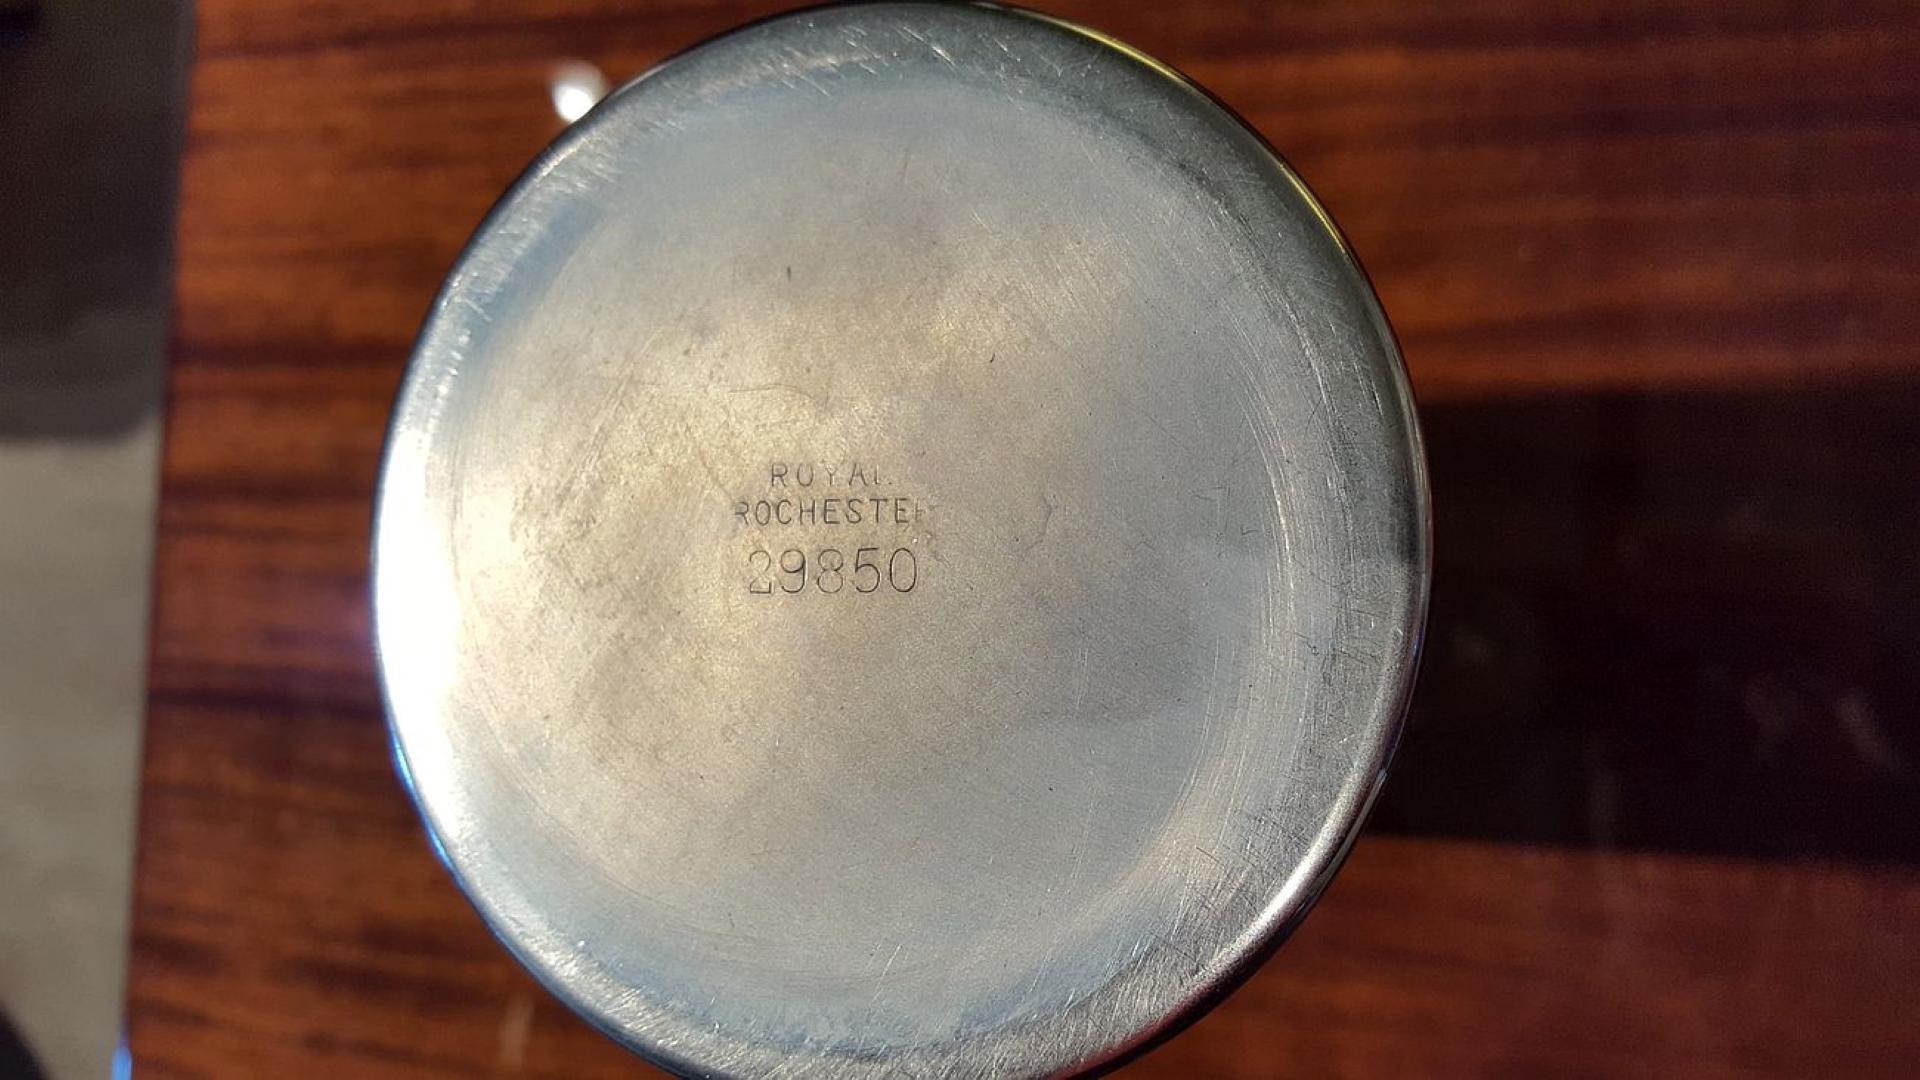 North American 1930s Royal Rochester Cocktail Shaker For Sale